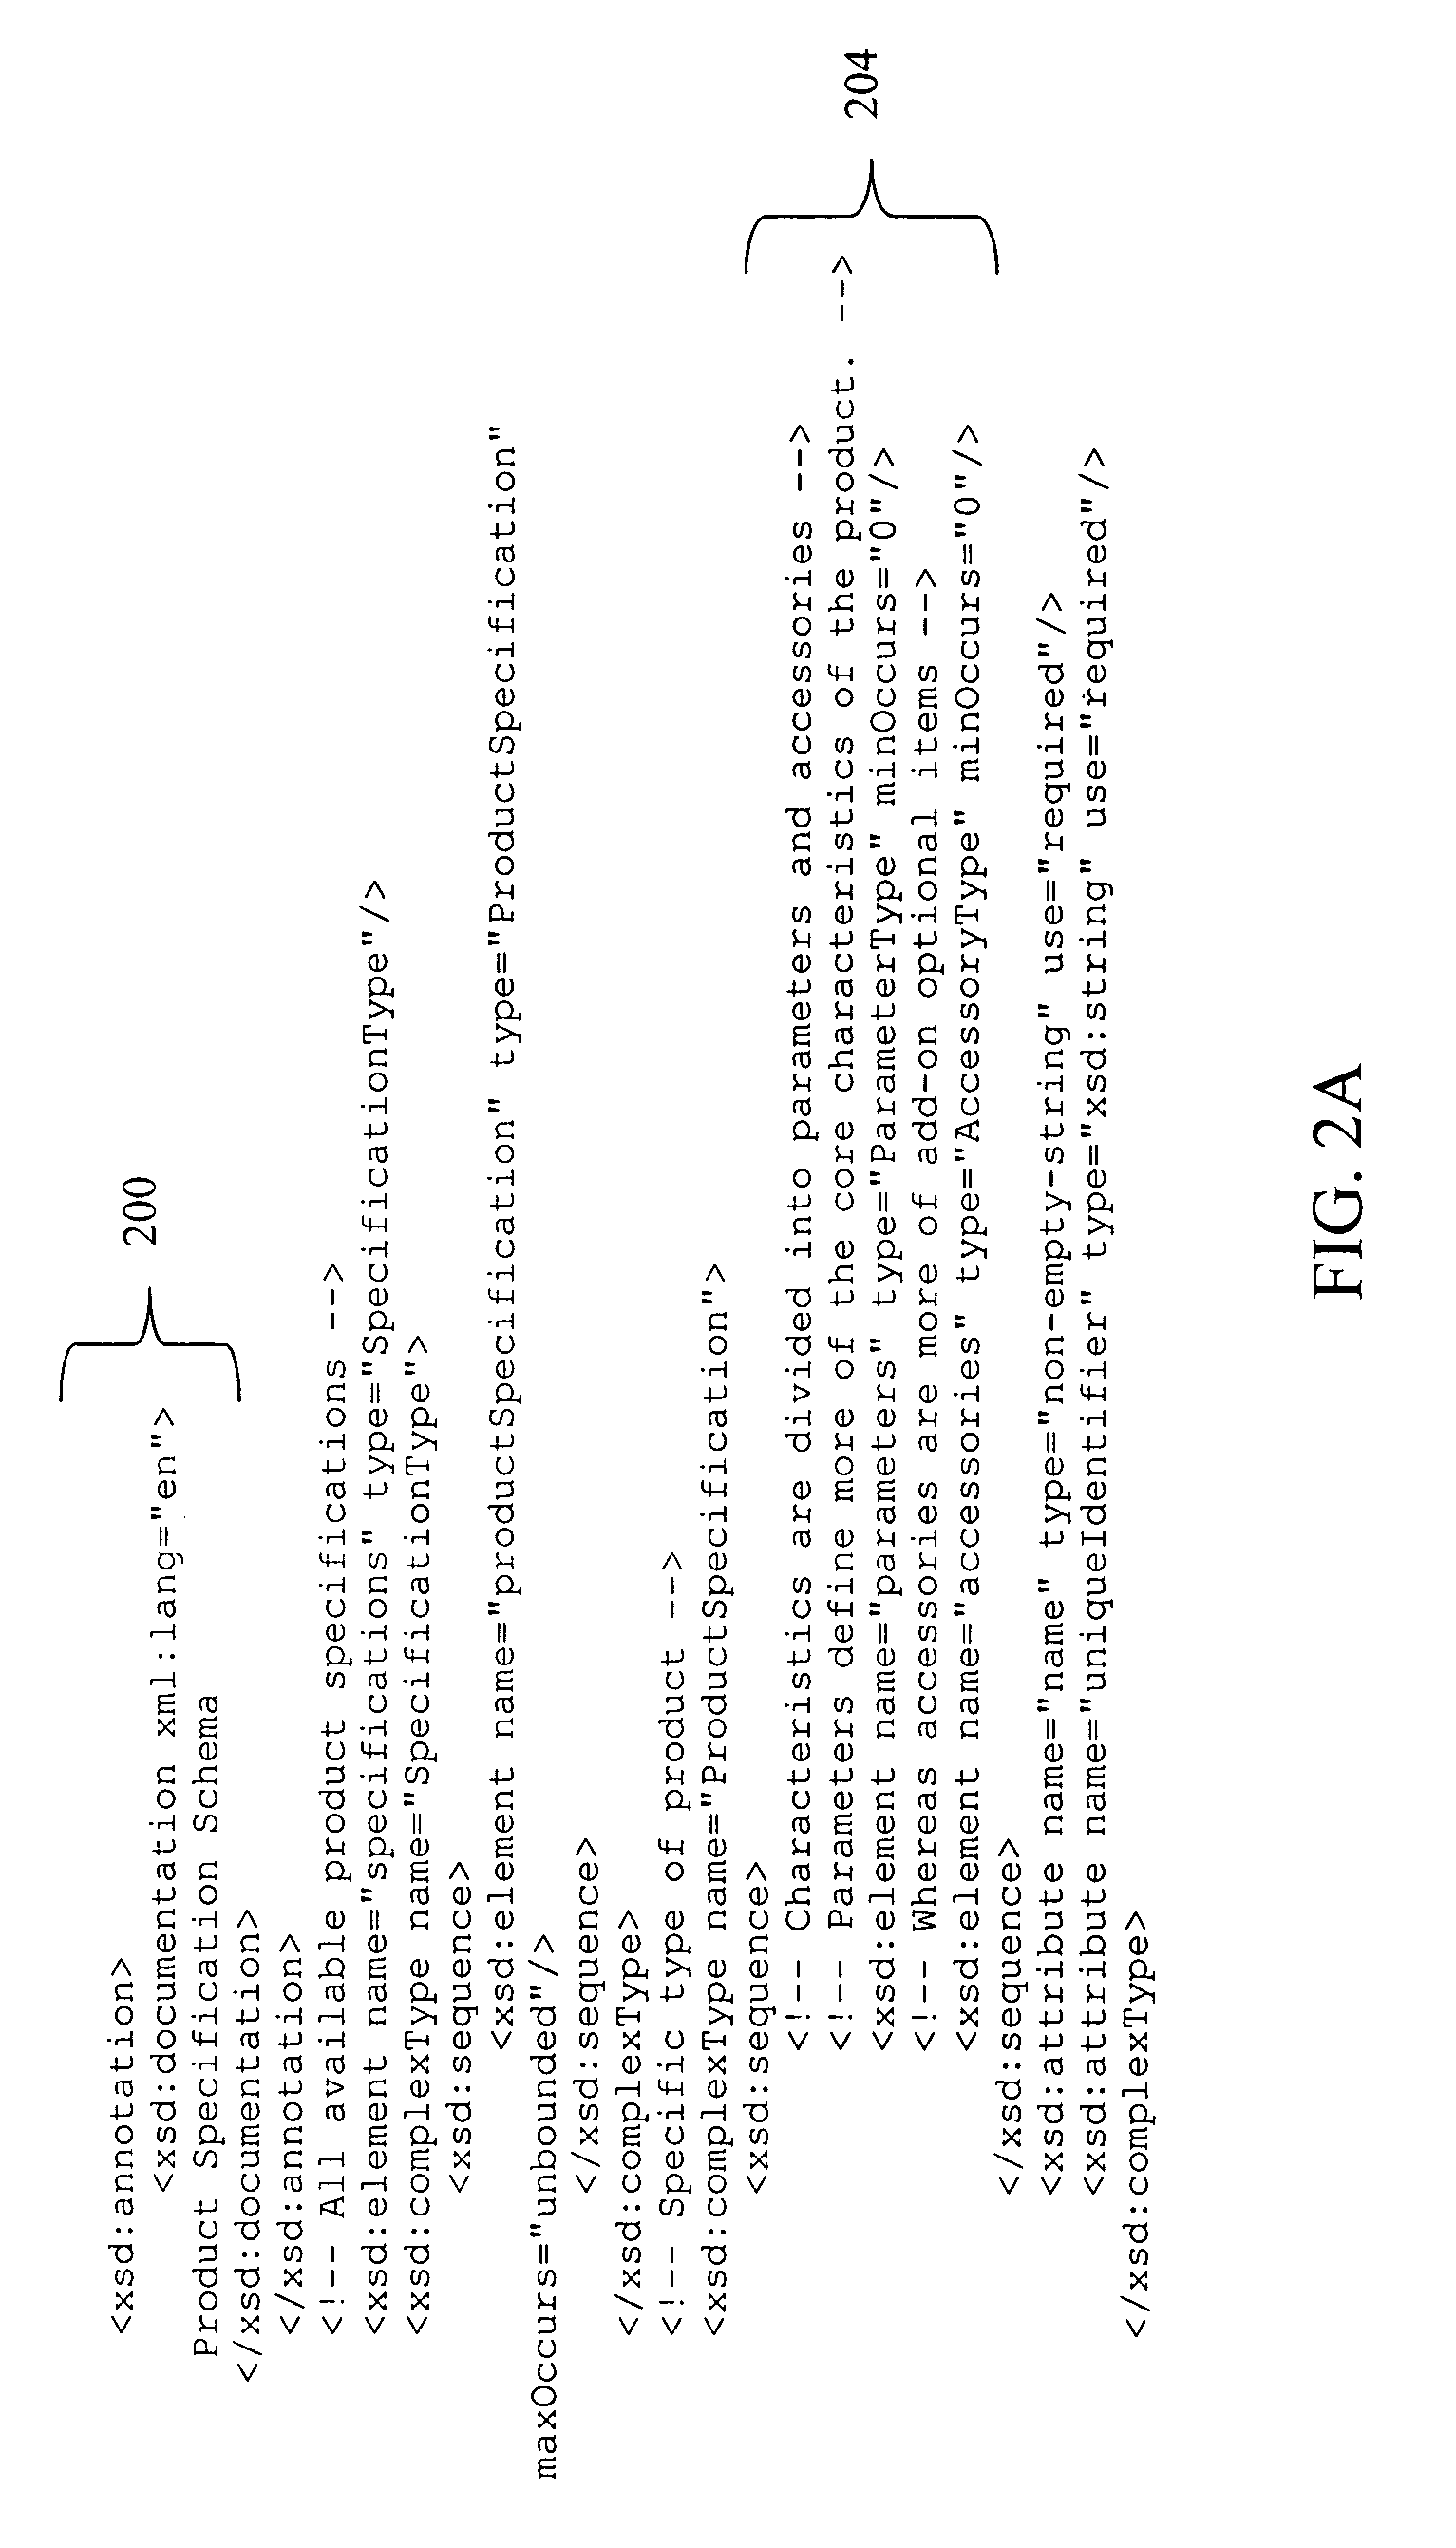 Generic product finder system and method